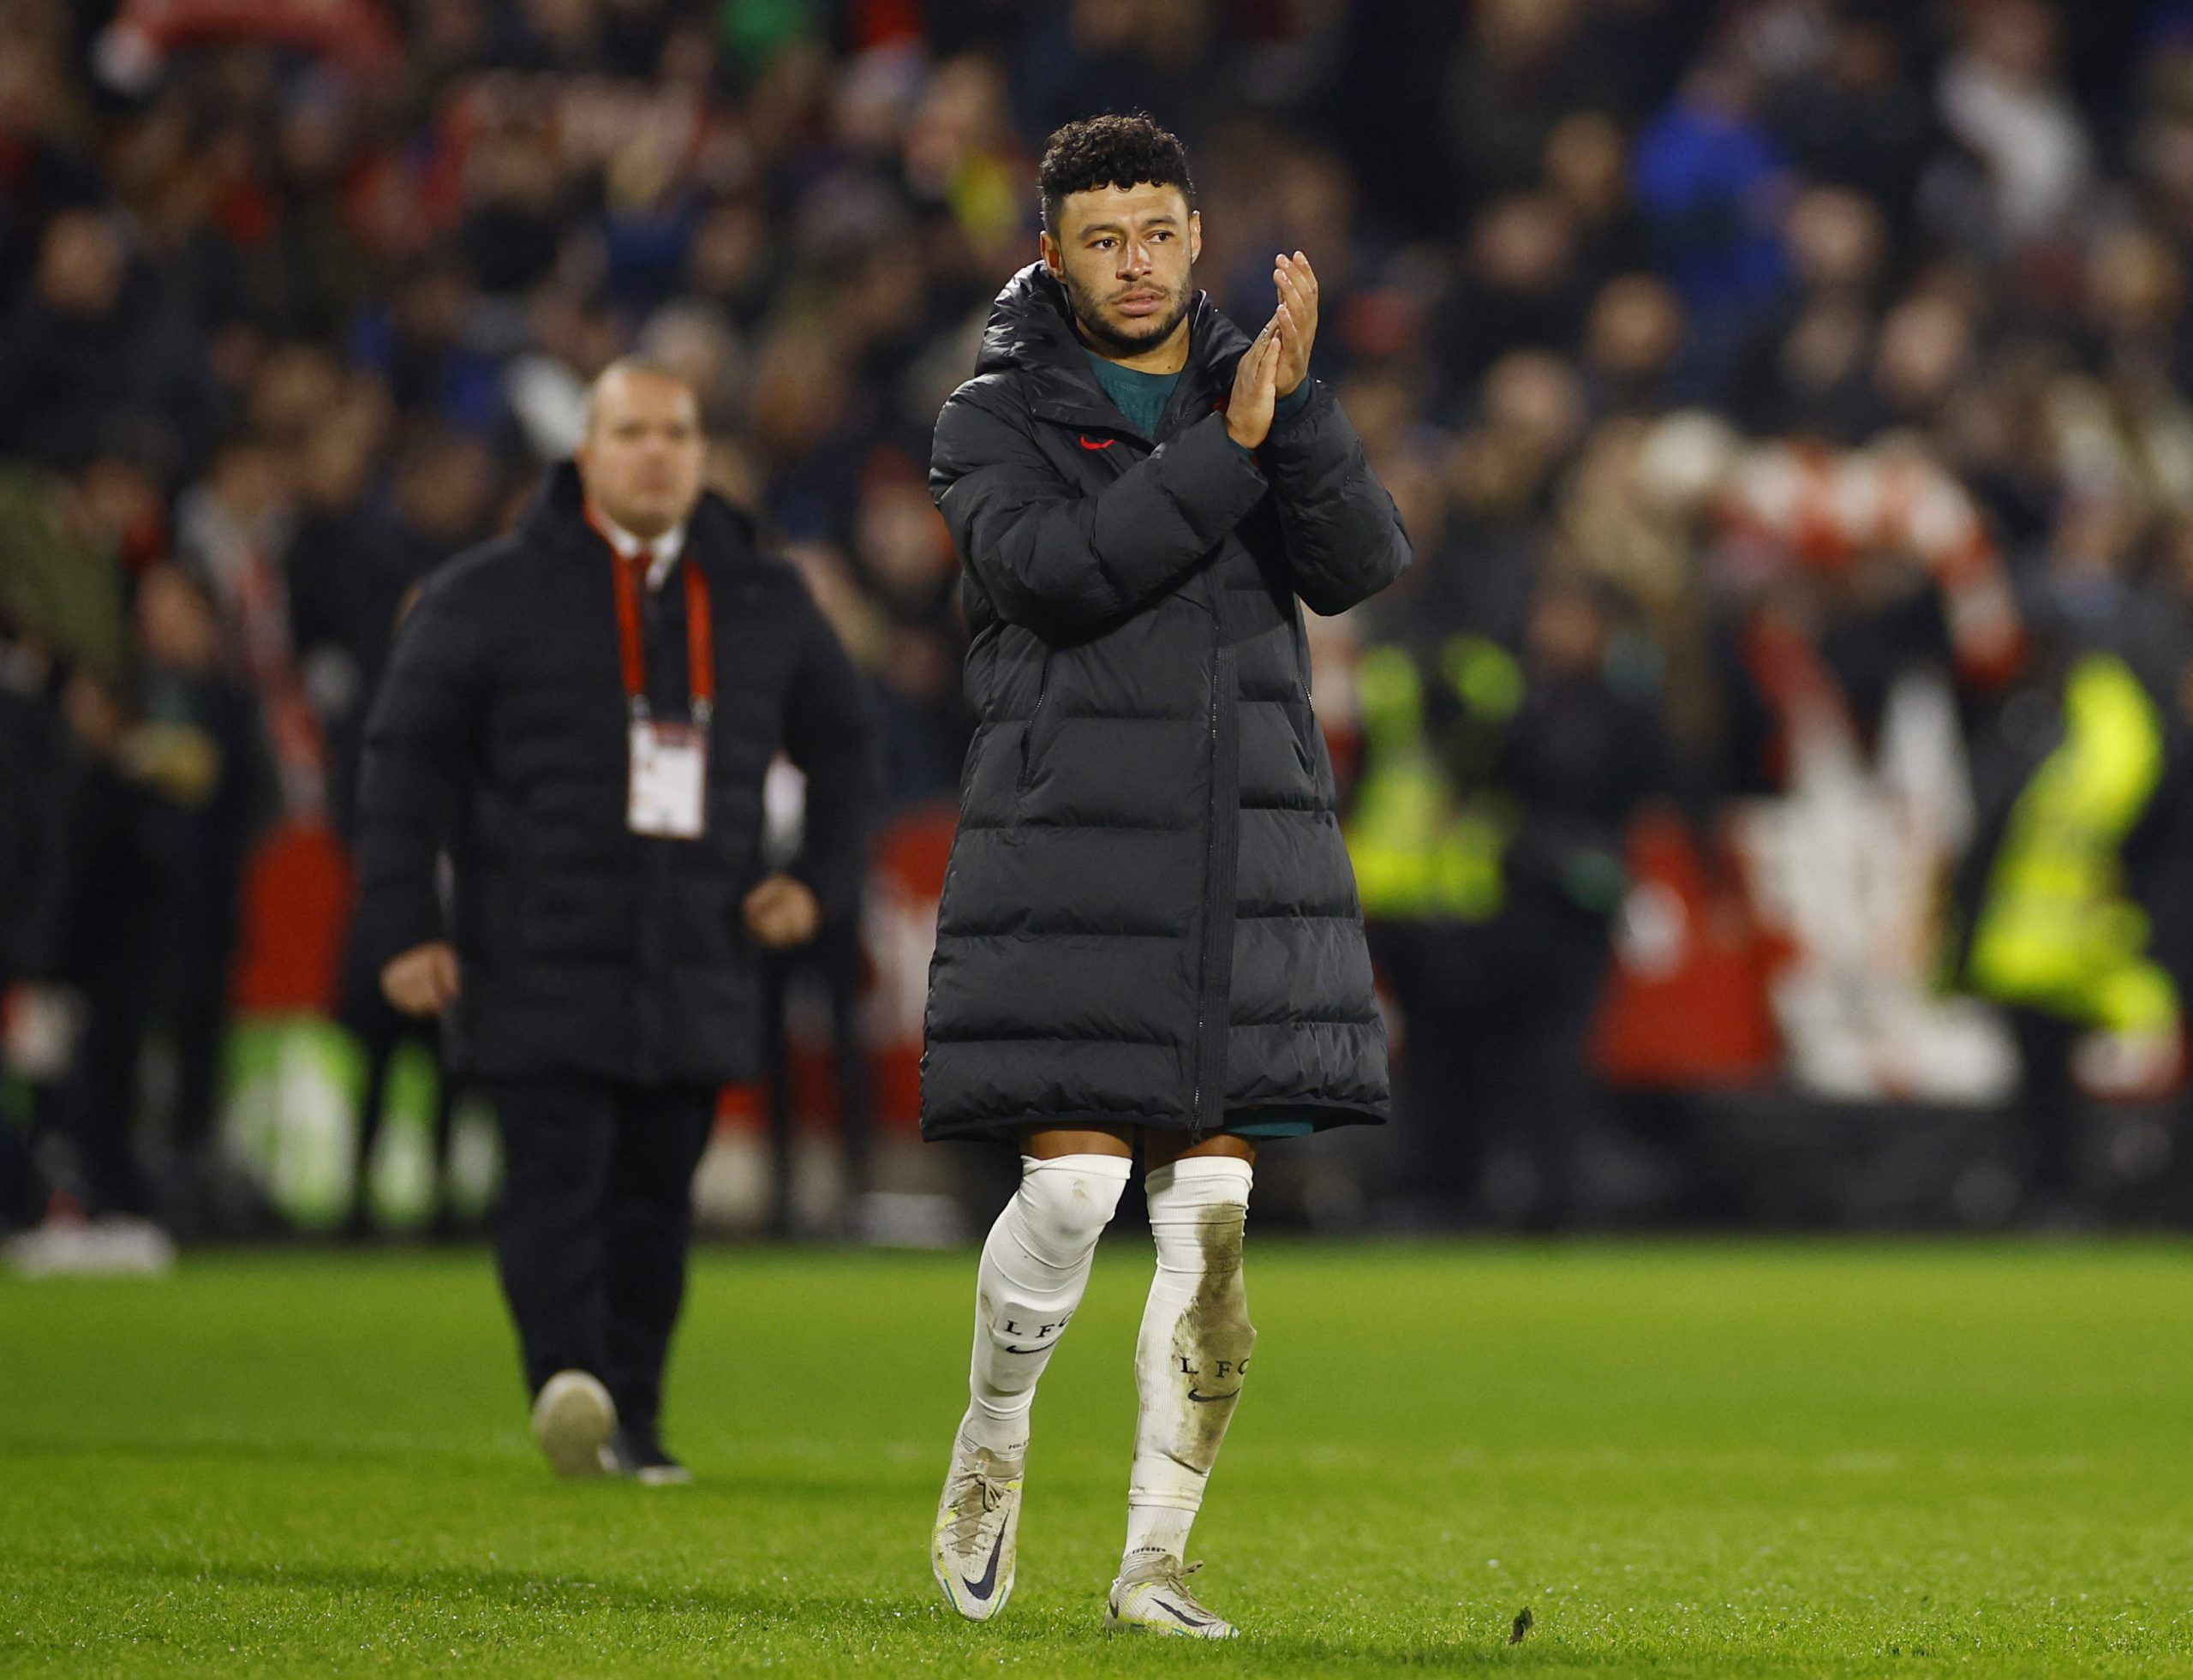 Soccer Football - Premier League - Brentford v Liverpool - Brentford Community Stadium, London, Britain - January 2, 2023 Liverpool's Alex Oxlade-Chamberlain looks dejected after the match Action Images via Reuters/John Sibley EDITORIAL USE ONLY. No use with unauthorized audio, video, data, fixture lists, club/league logos or 'live' services. Online in-match use limited to 75 images, no video emulation. No use in betting, games or single club /league/player publications.  Please contact your acc